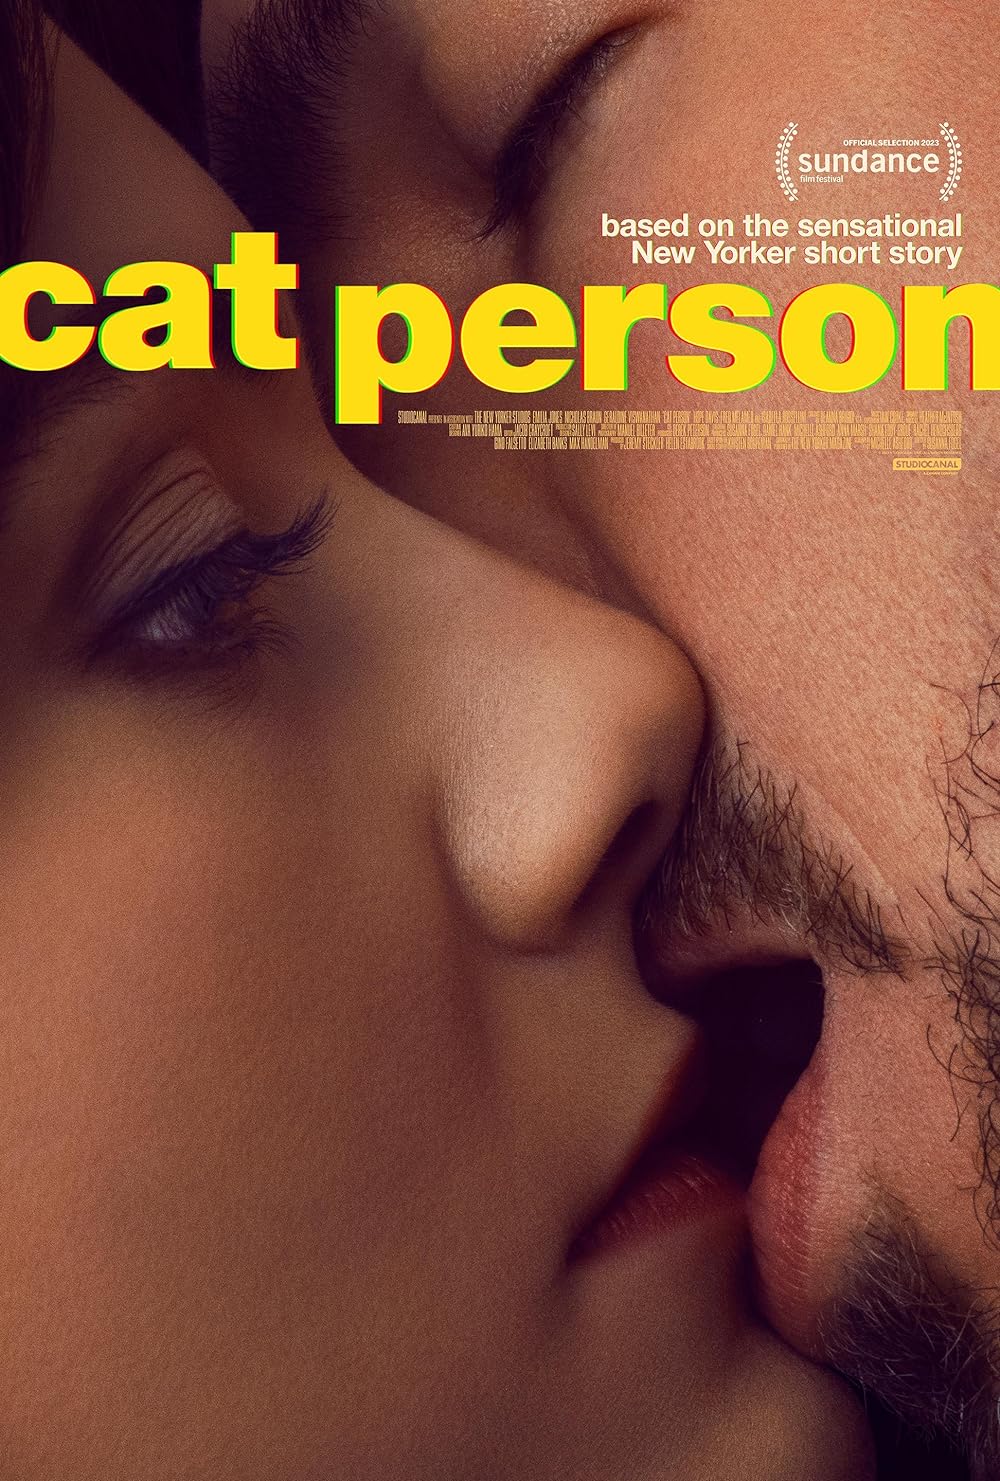 Based on the viral New Yorker short story, Cat Person by Susanna Fogle is a genre-blending rom-com and thriller. The story begins as a romantic comedy about two people with a texting relationship that doesn't live up to real-life expectations, eventually taking a thrilling turn. It provides a relatable yet unexpected experience for those looking for a unique romantic film.